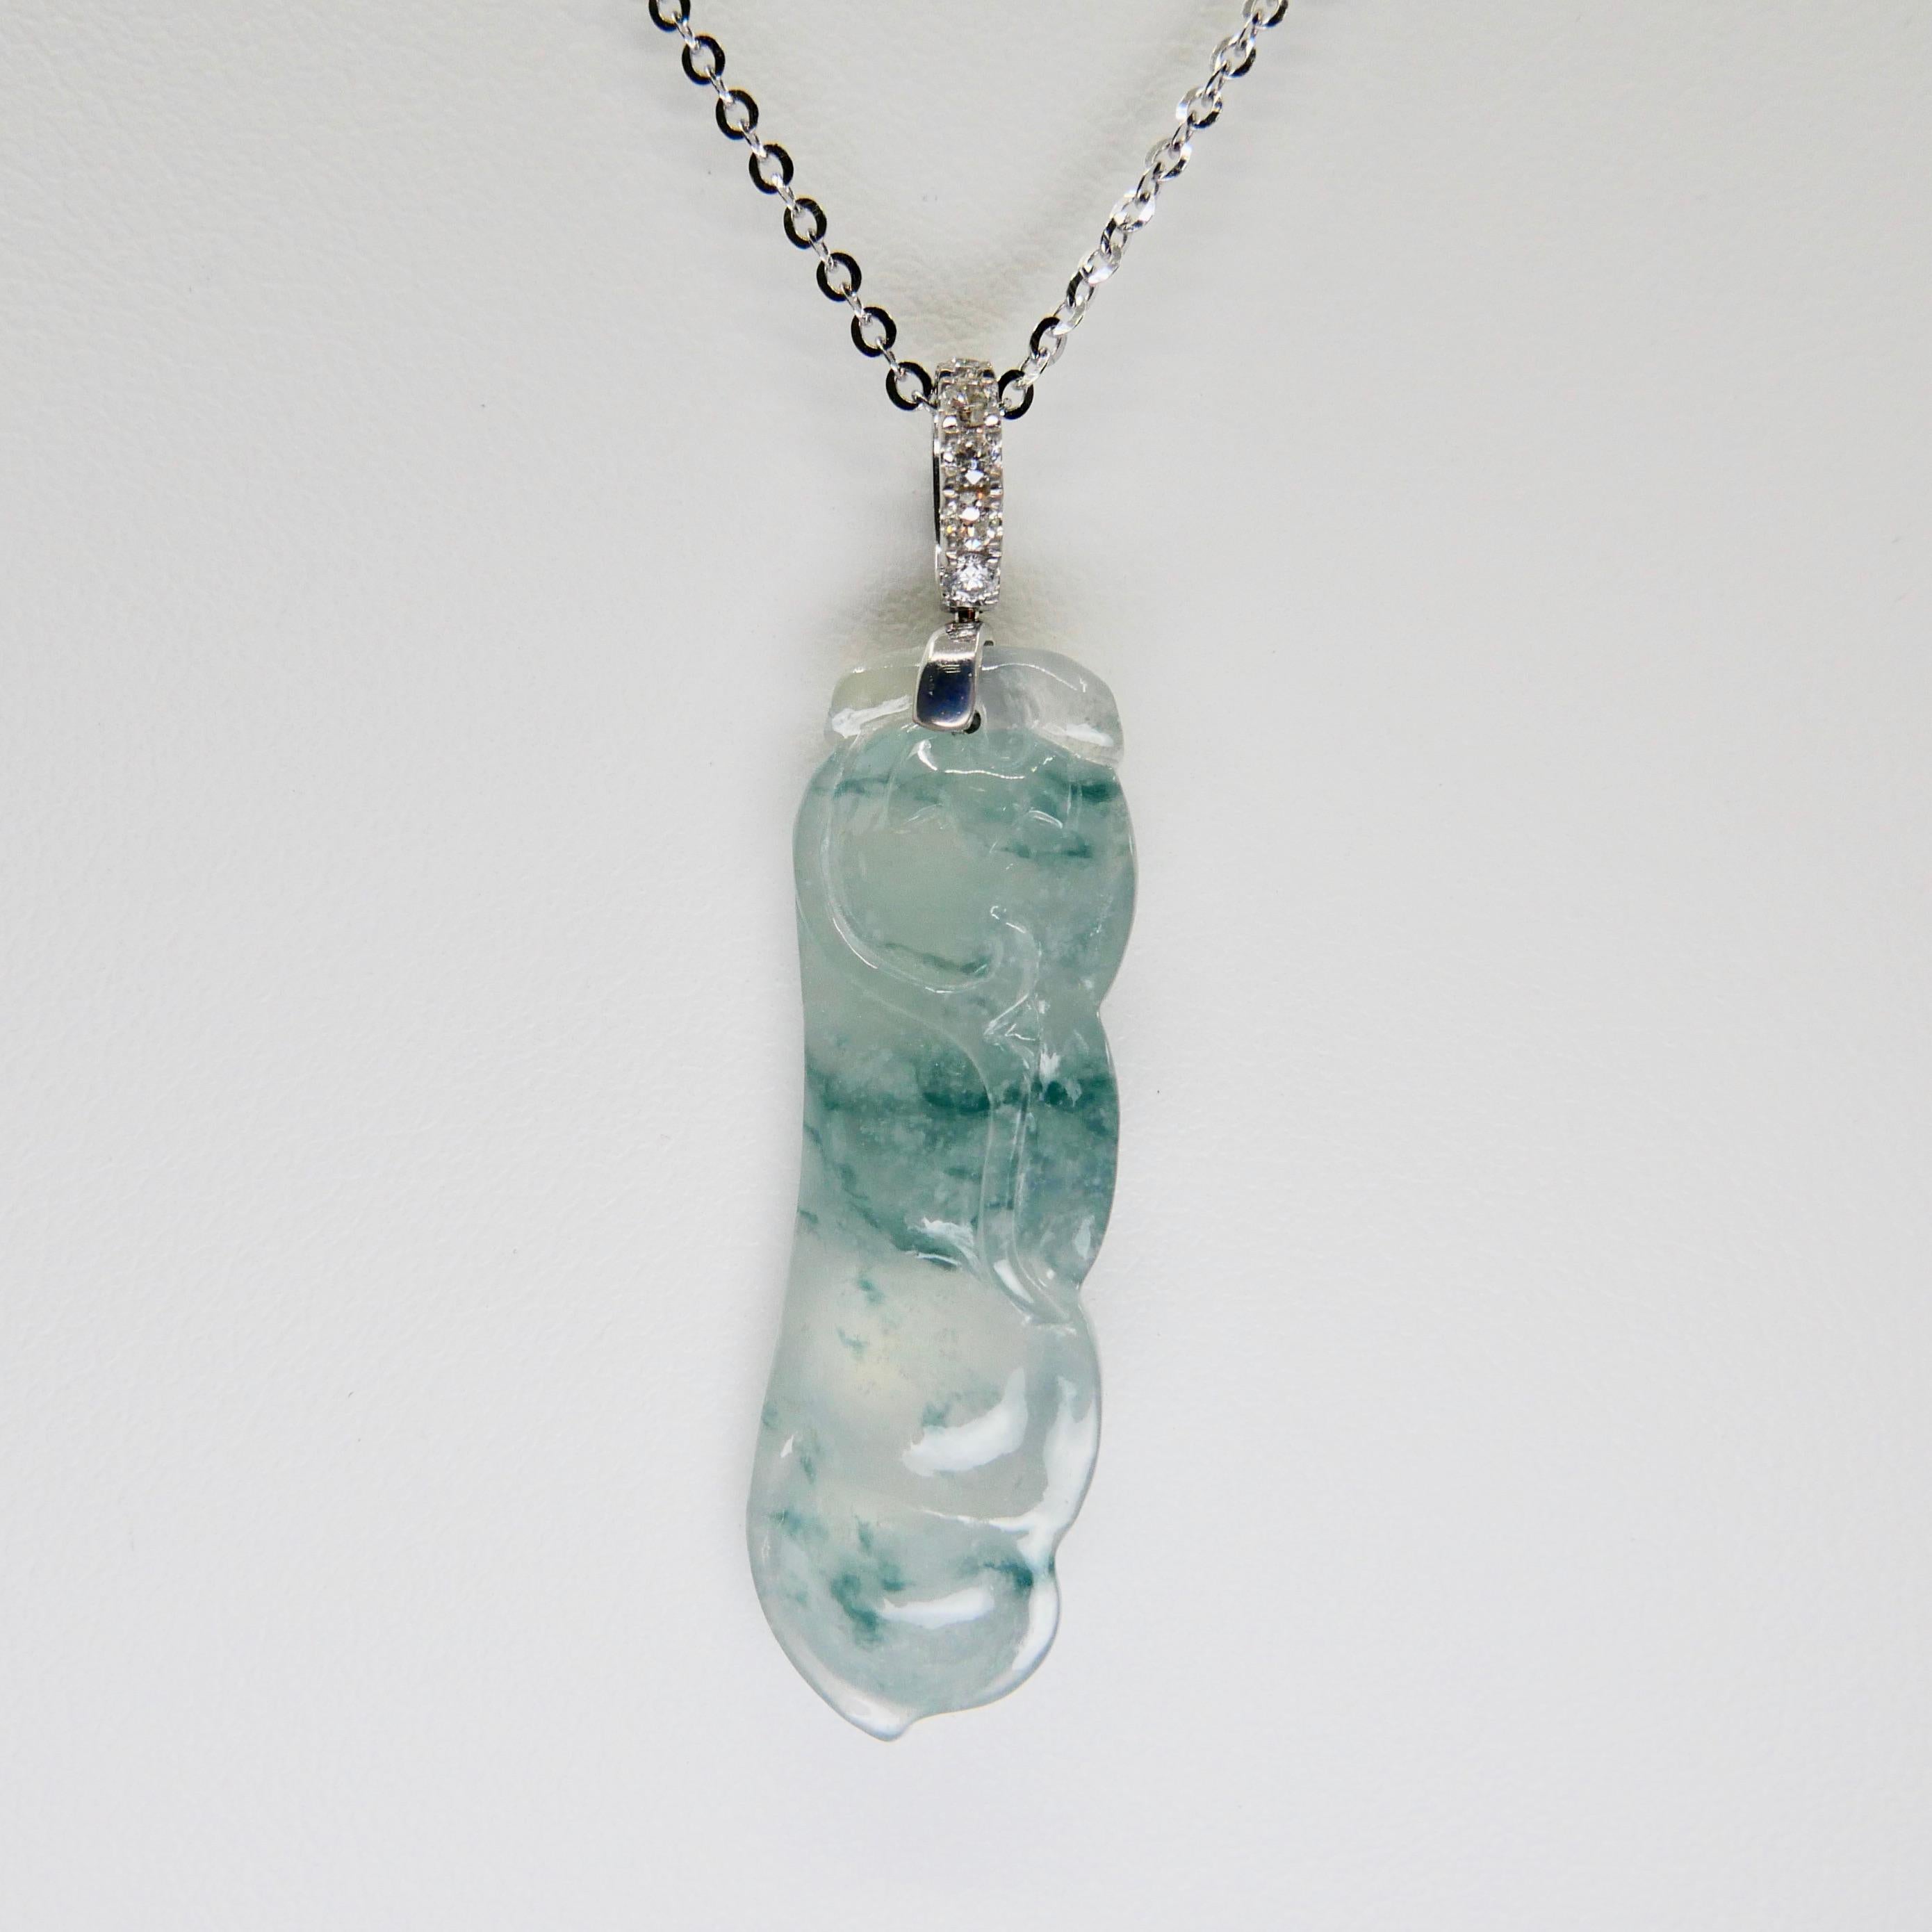 Certified Type A Icy Peapod Jade and Diamond Drop Necklace Pendant, Green Veins 2